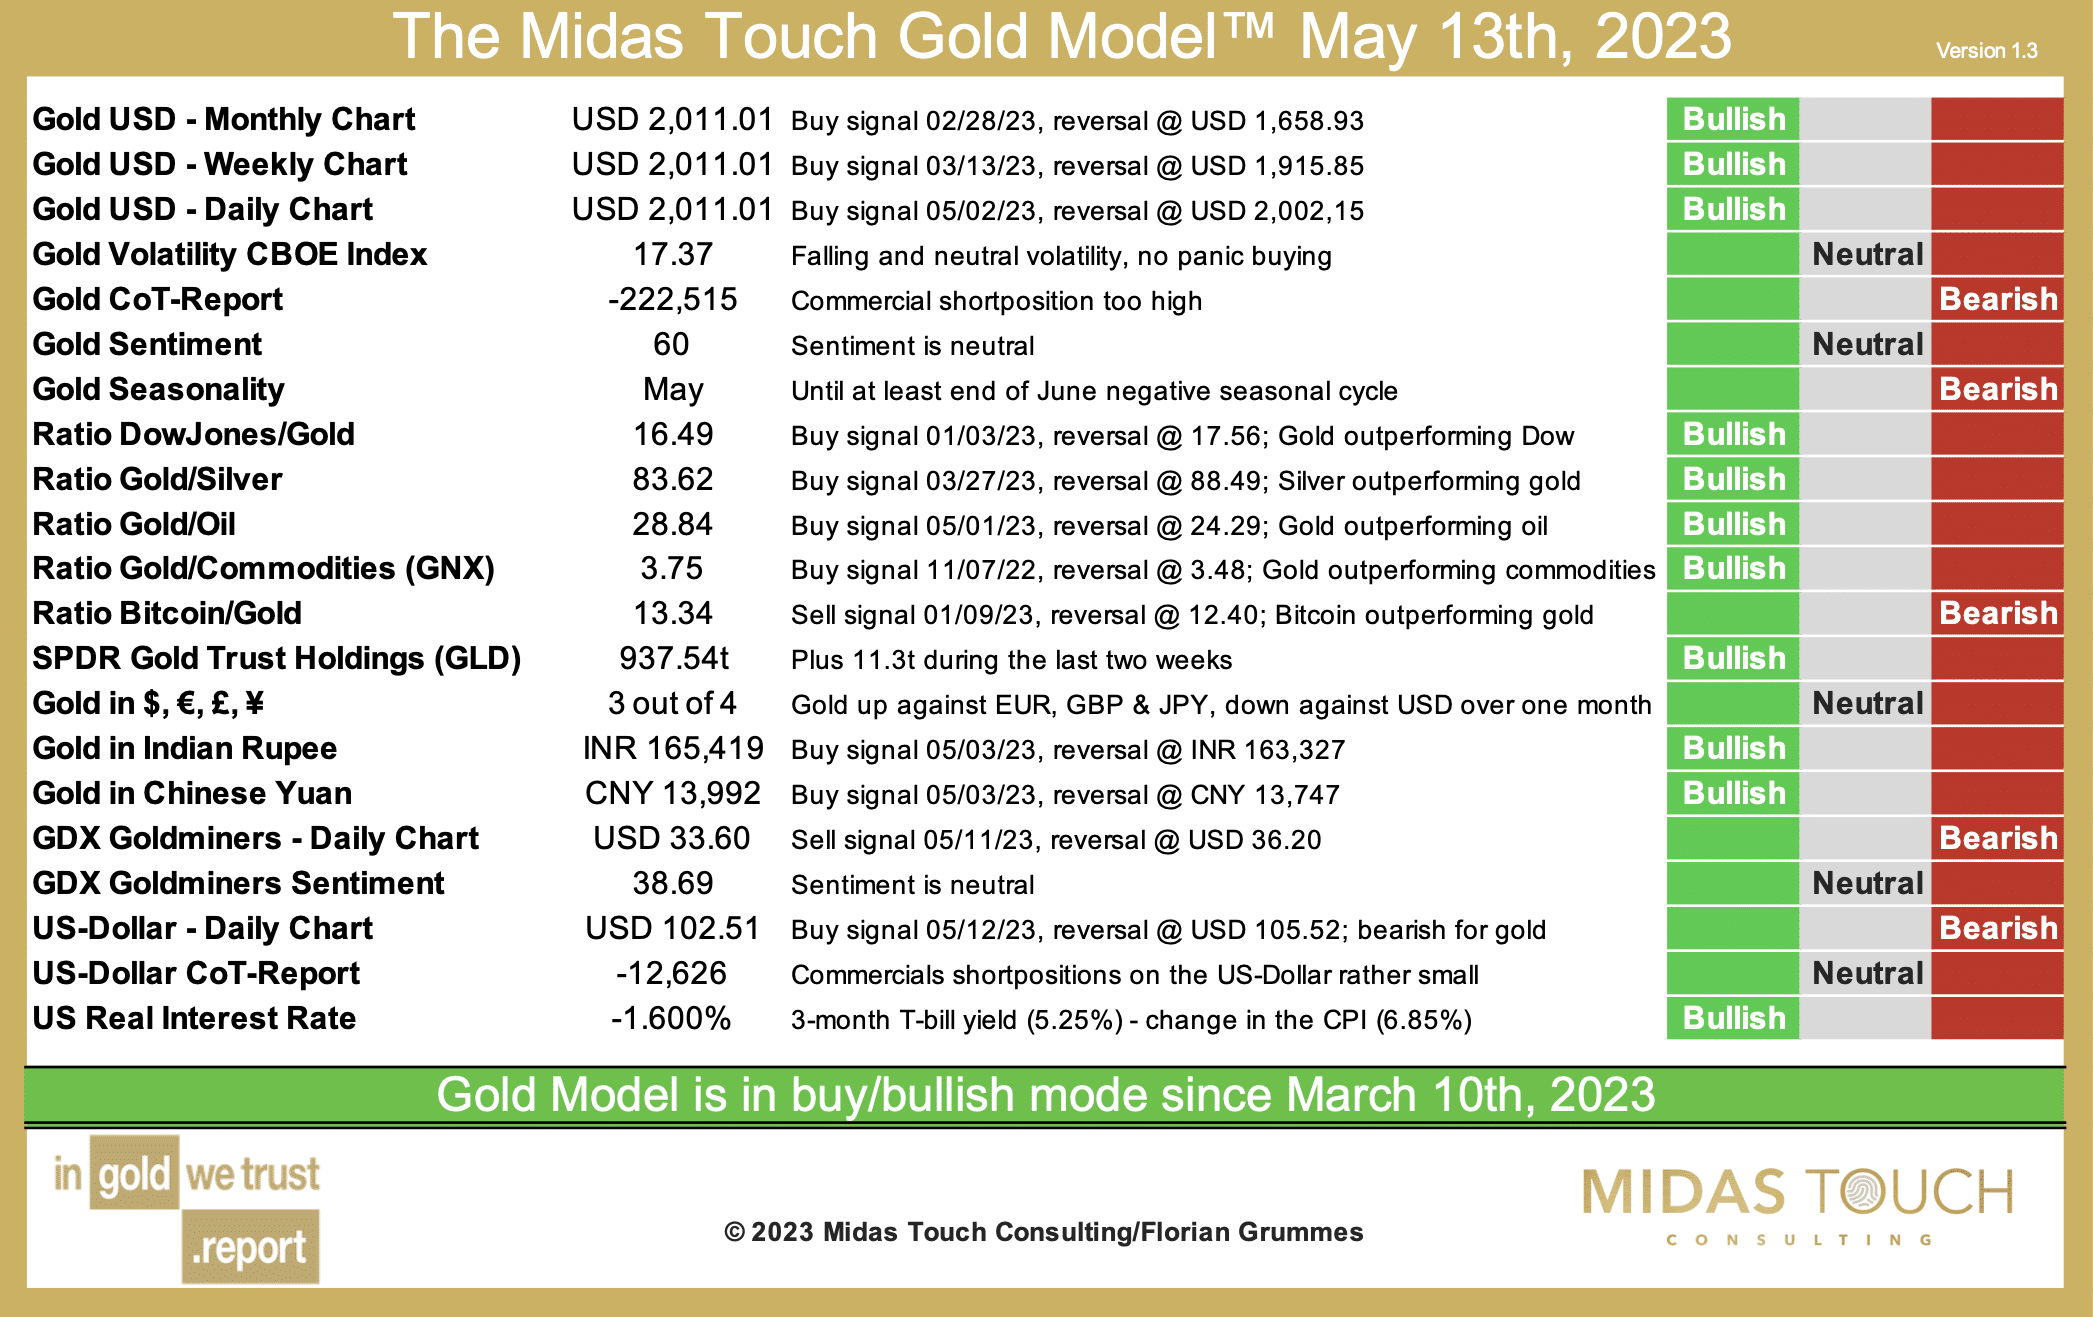 The Midas Touch Gold Model™ as of May 13th, 2023. Source: Midas Touch Consulting. May 14th, 2023: The Midas Touch Gold Model™ Update